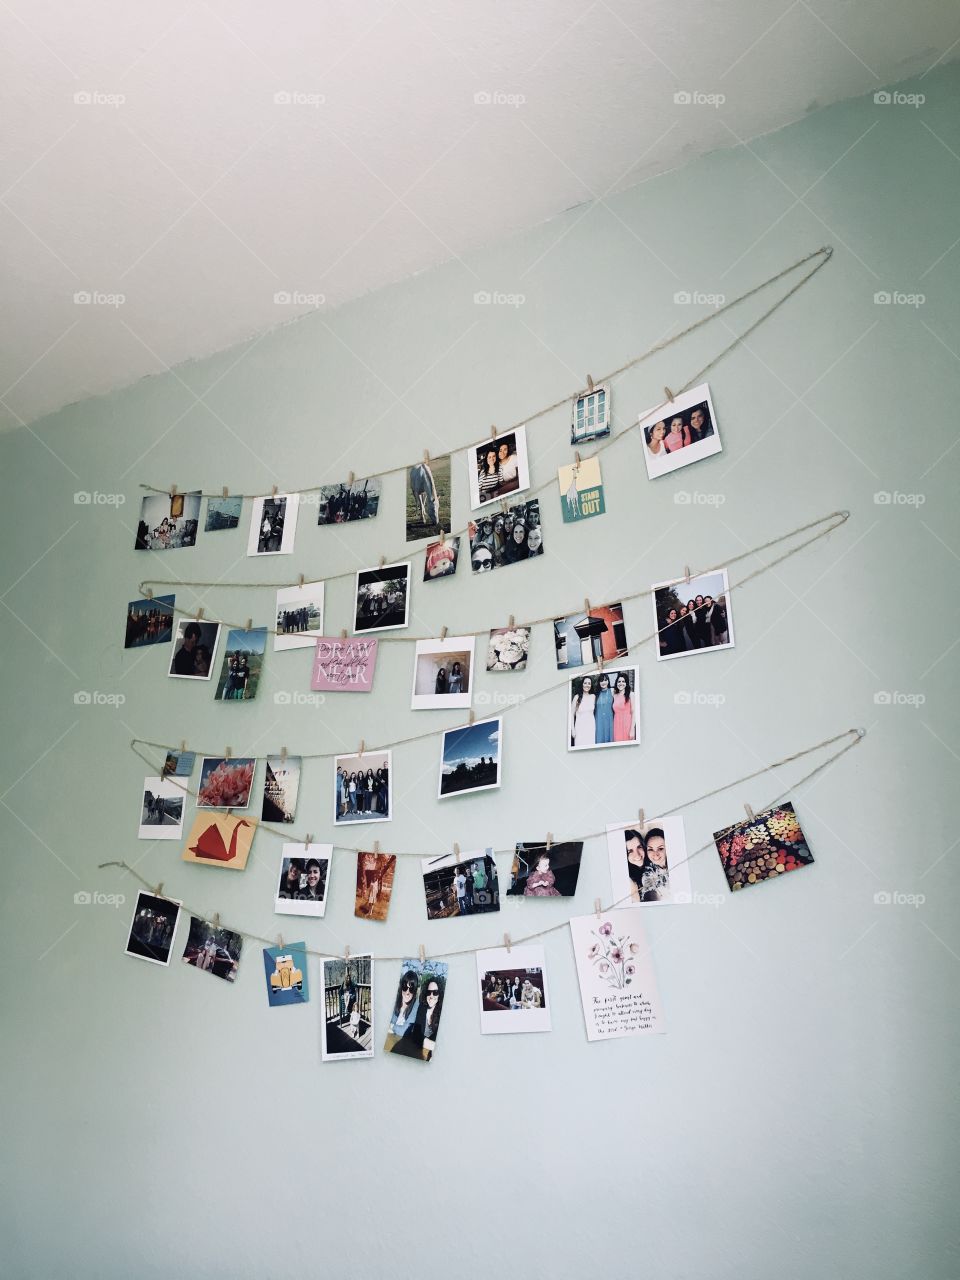 This is a simple photo of a wall in my bedroom that has different pictures hanging from little pins. Not only are there photos of random things- but there is also precious memories captured here of people who are dear to me. 